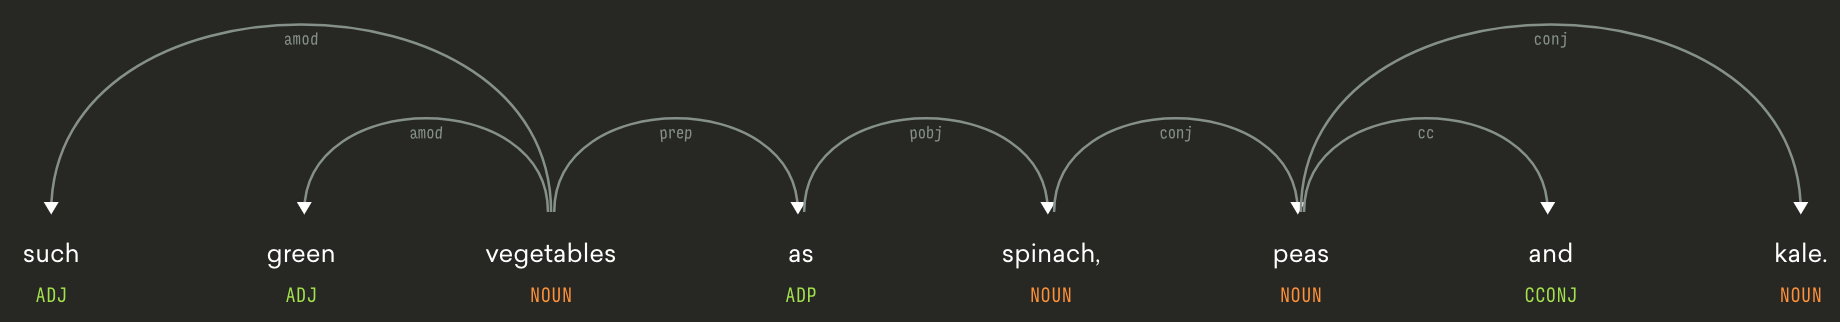 Example dependency path using spaCy